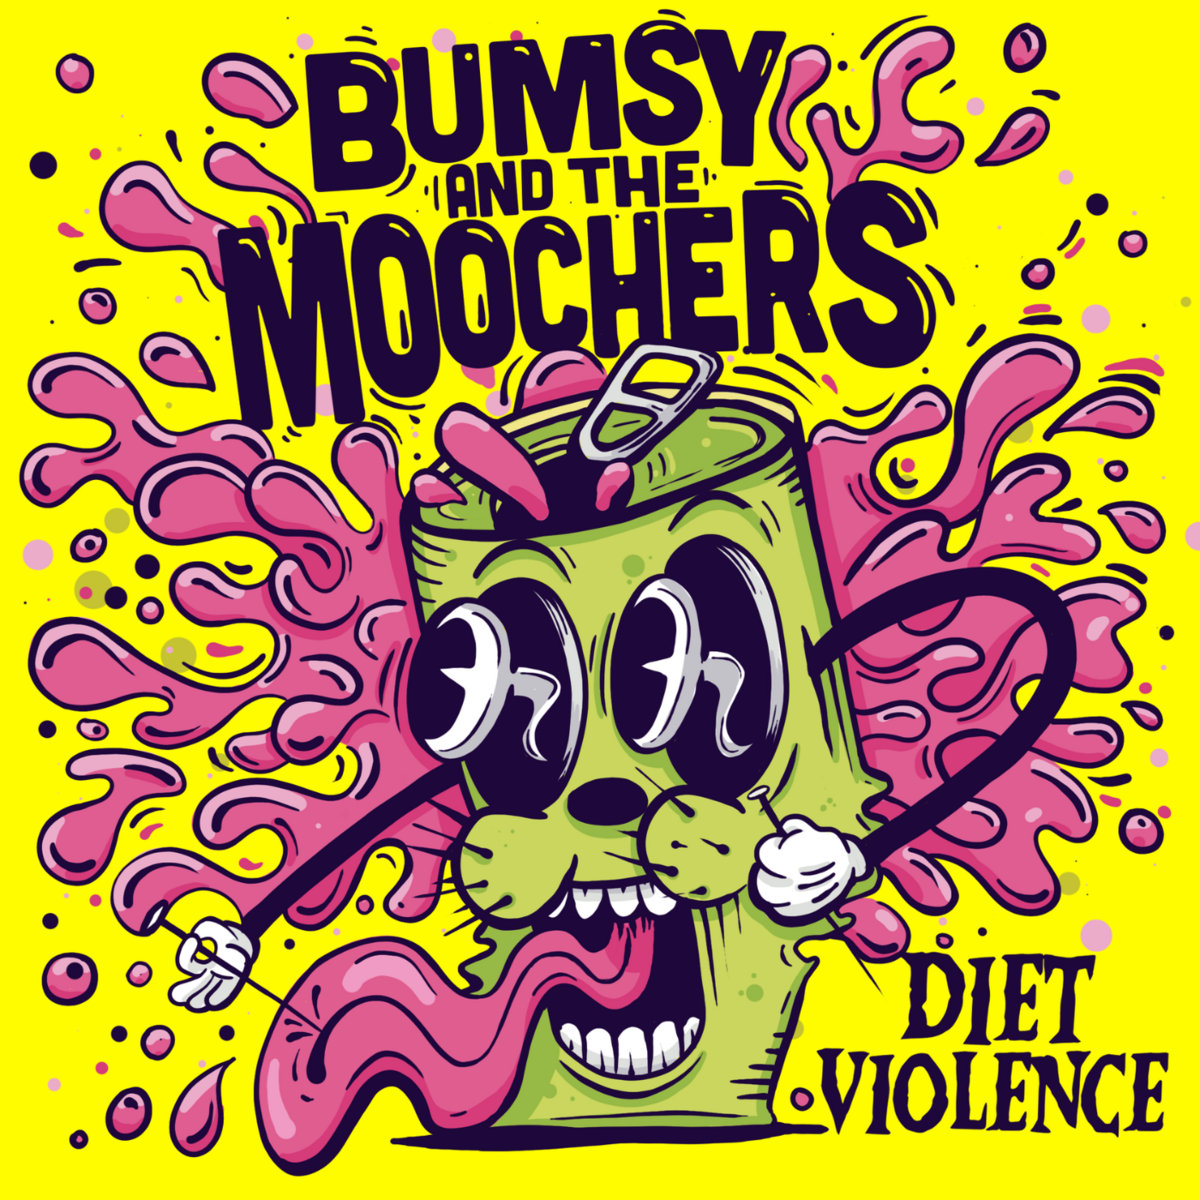 Bumsy & The Moochers/DIET VIOLENCE LP